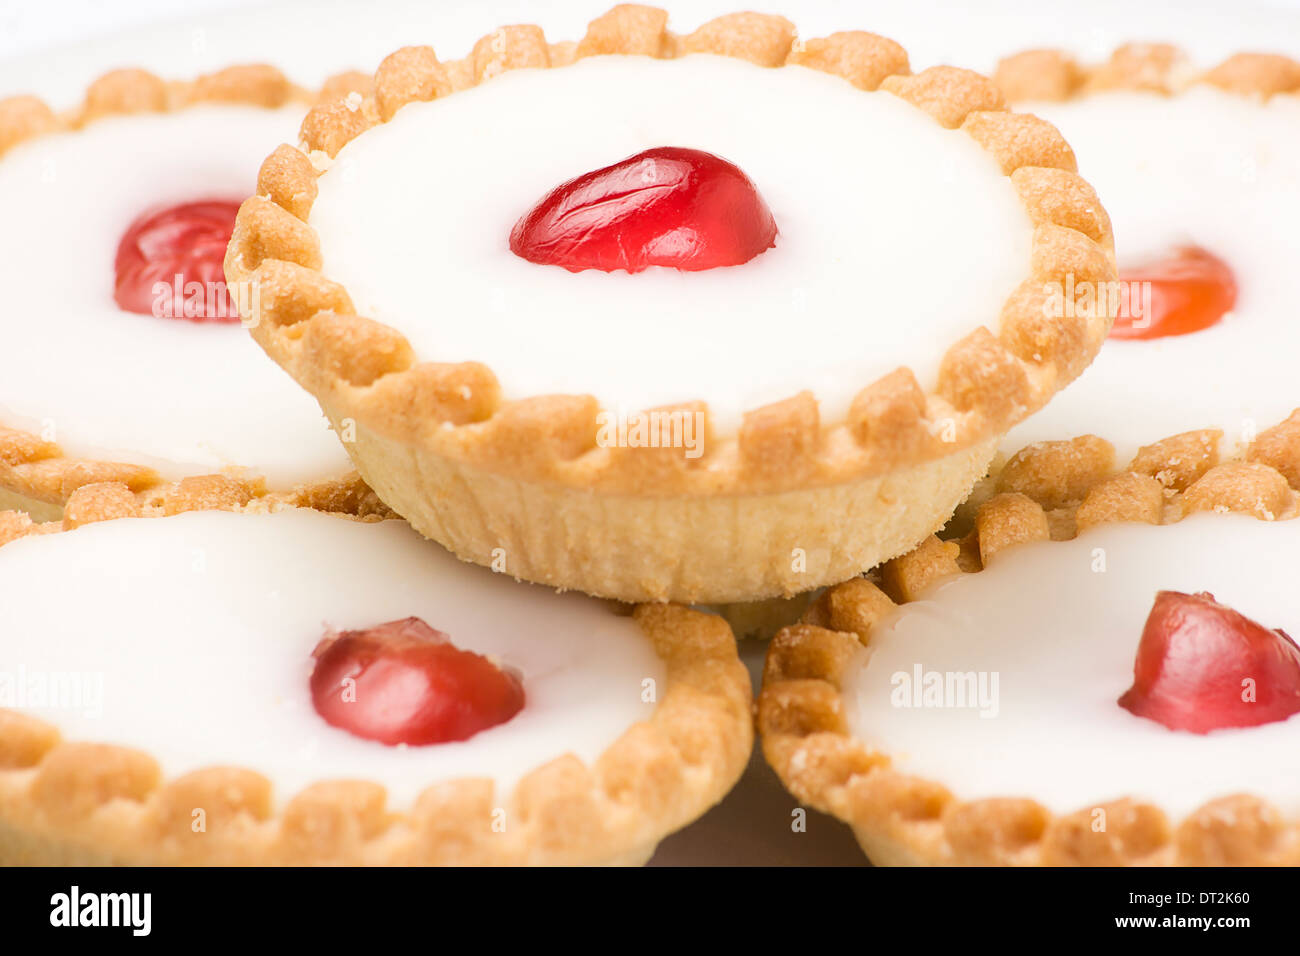 cherry tart cakes close up with fondant topping and a candid cherry in the middle The Bakewell Tart is an English confection Stock Photo